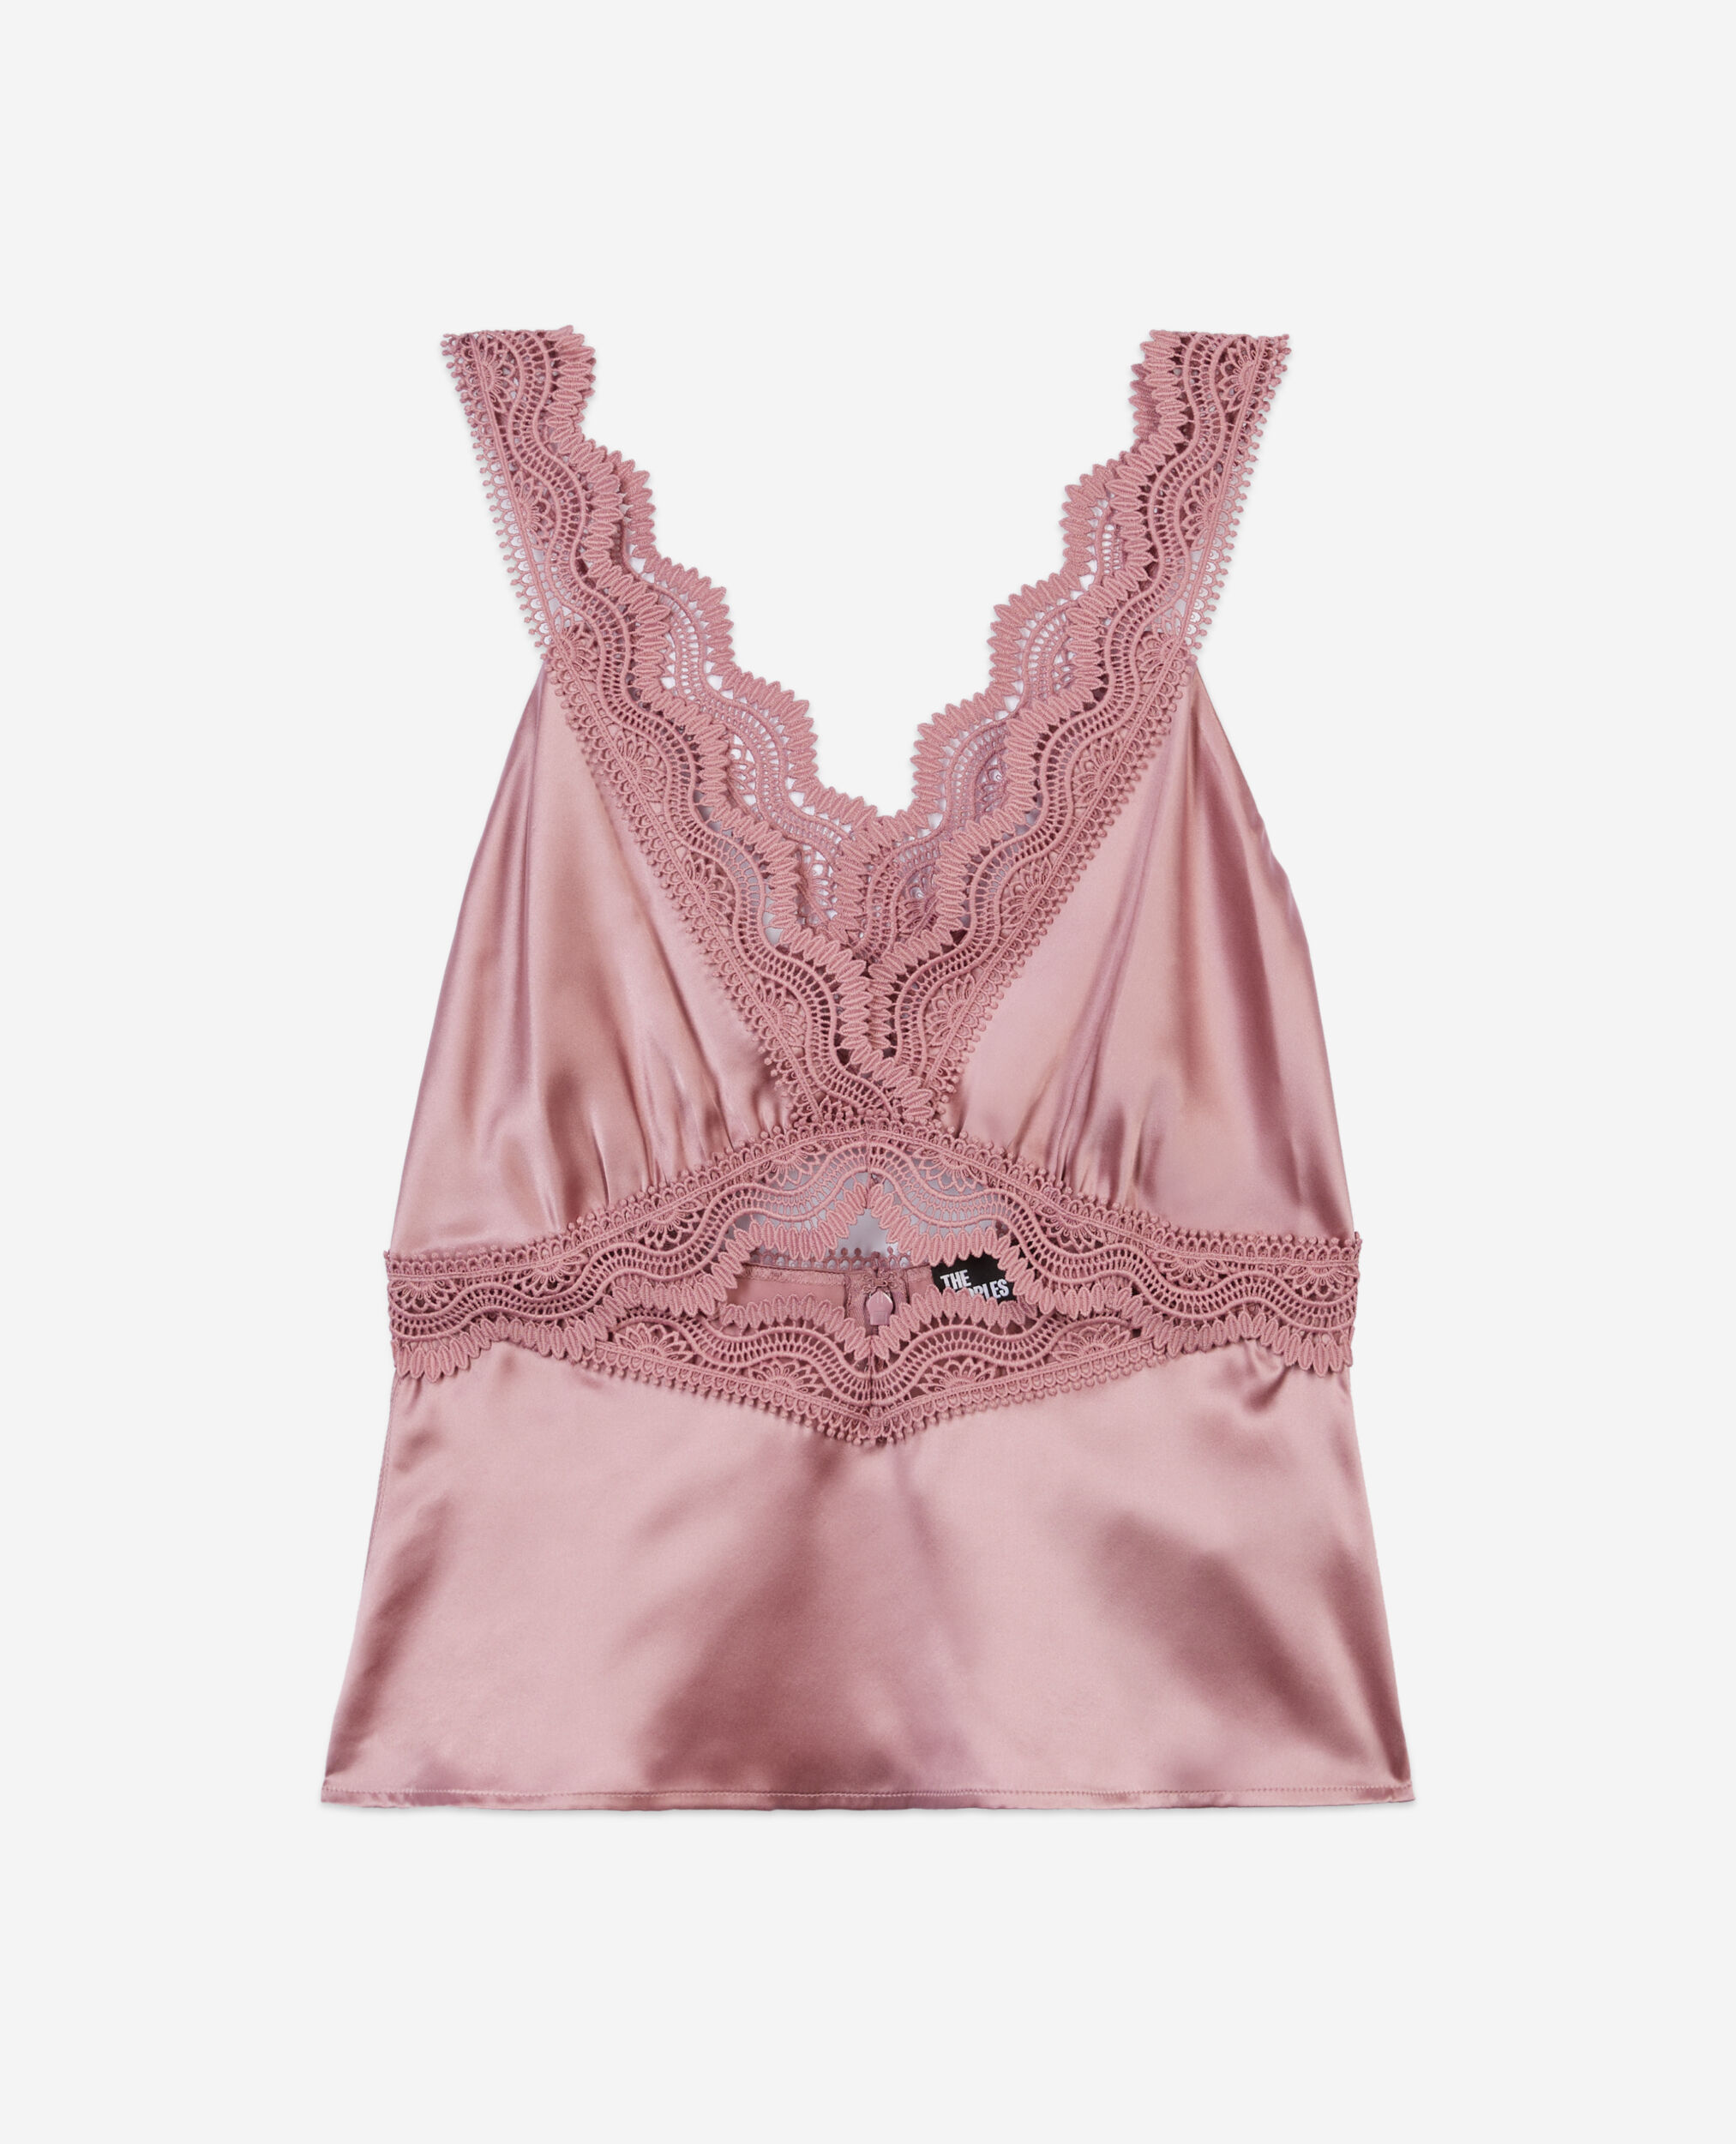 Lila Top mit Guipure-Details, PINK WOOD, hi-res image number null